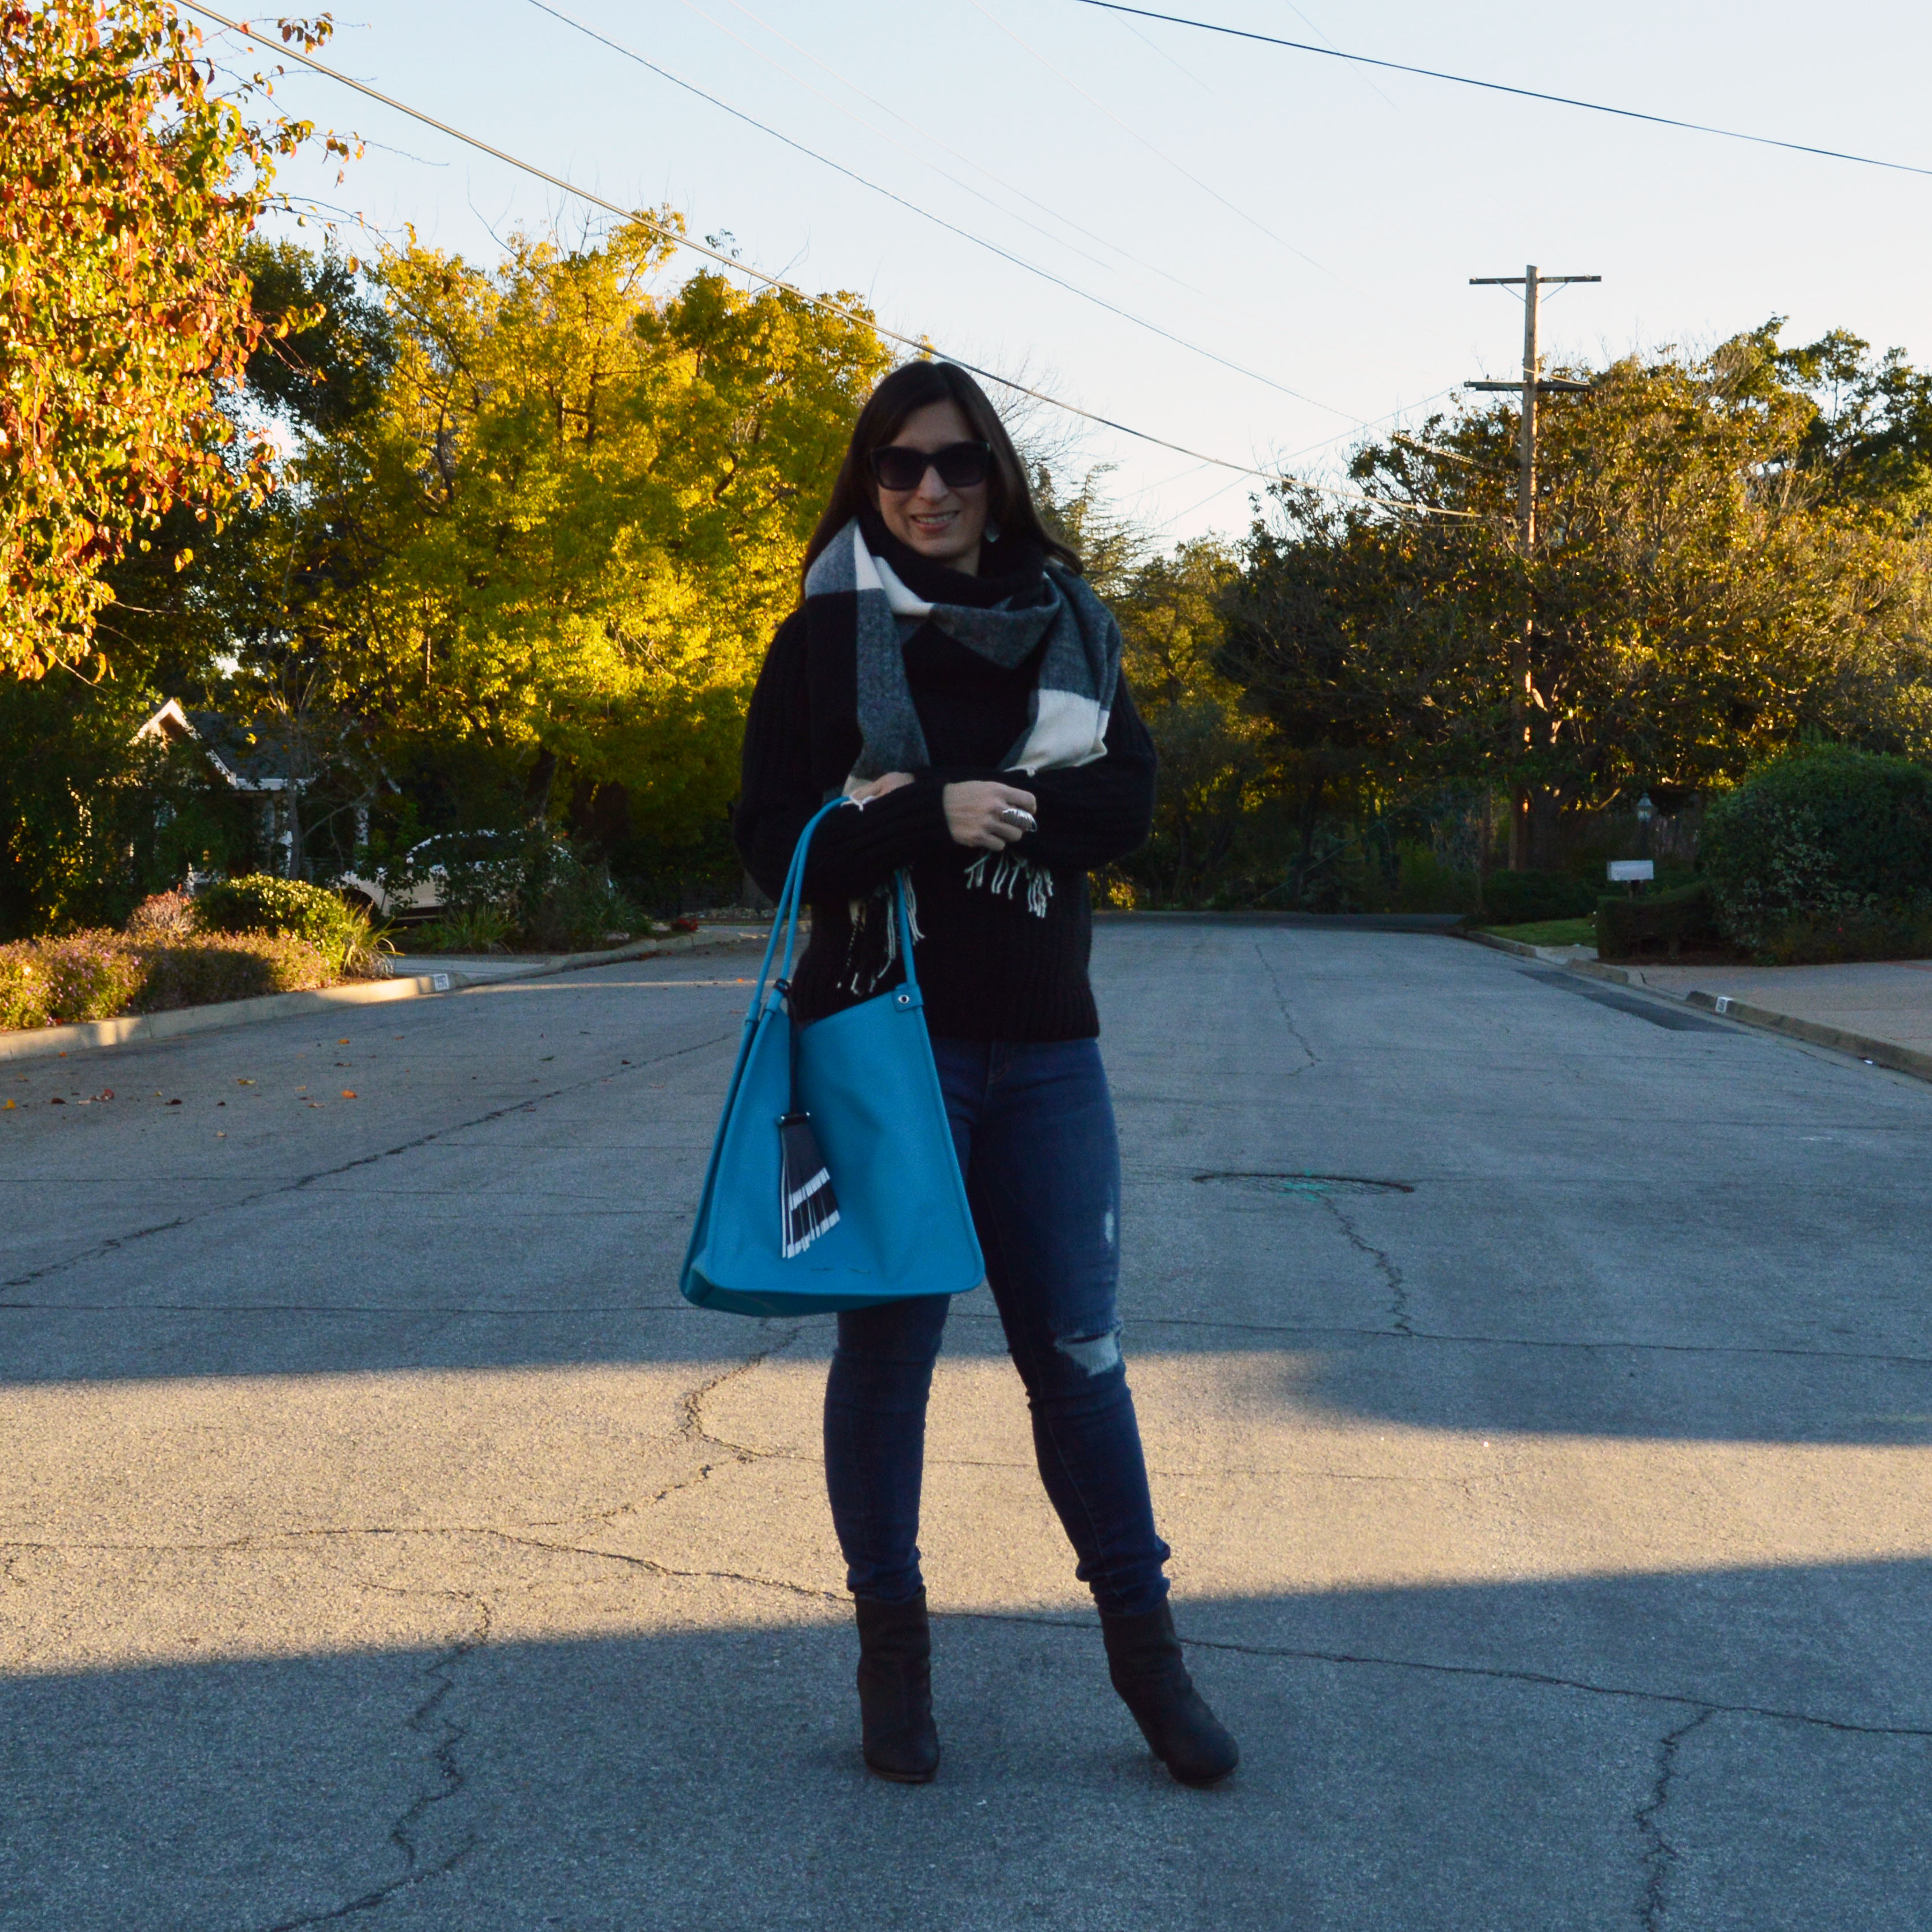 Classic casual outfit and pop of turquoise – Bay Area Fashionista